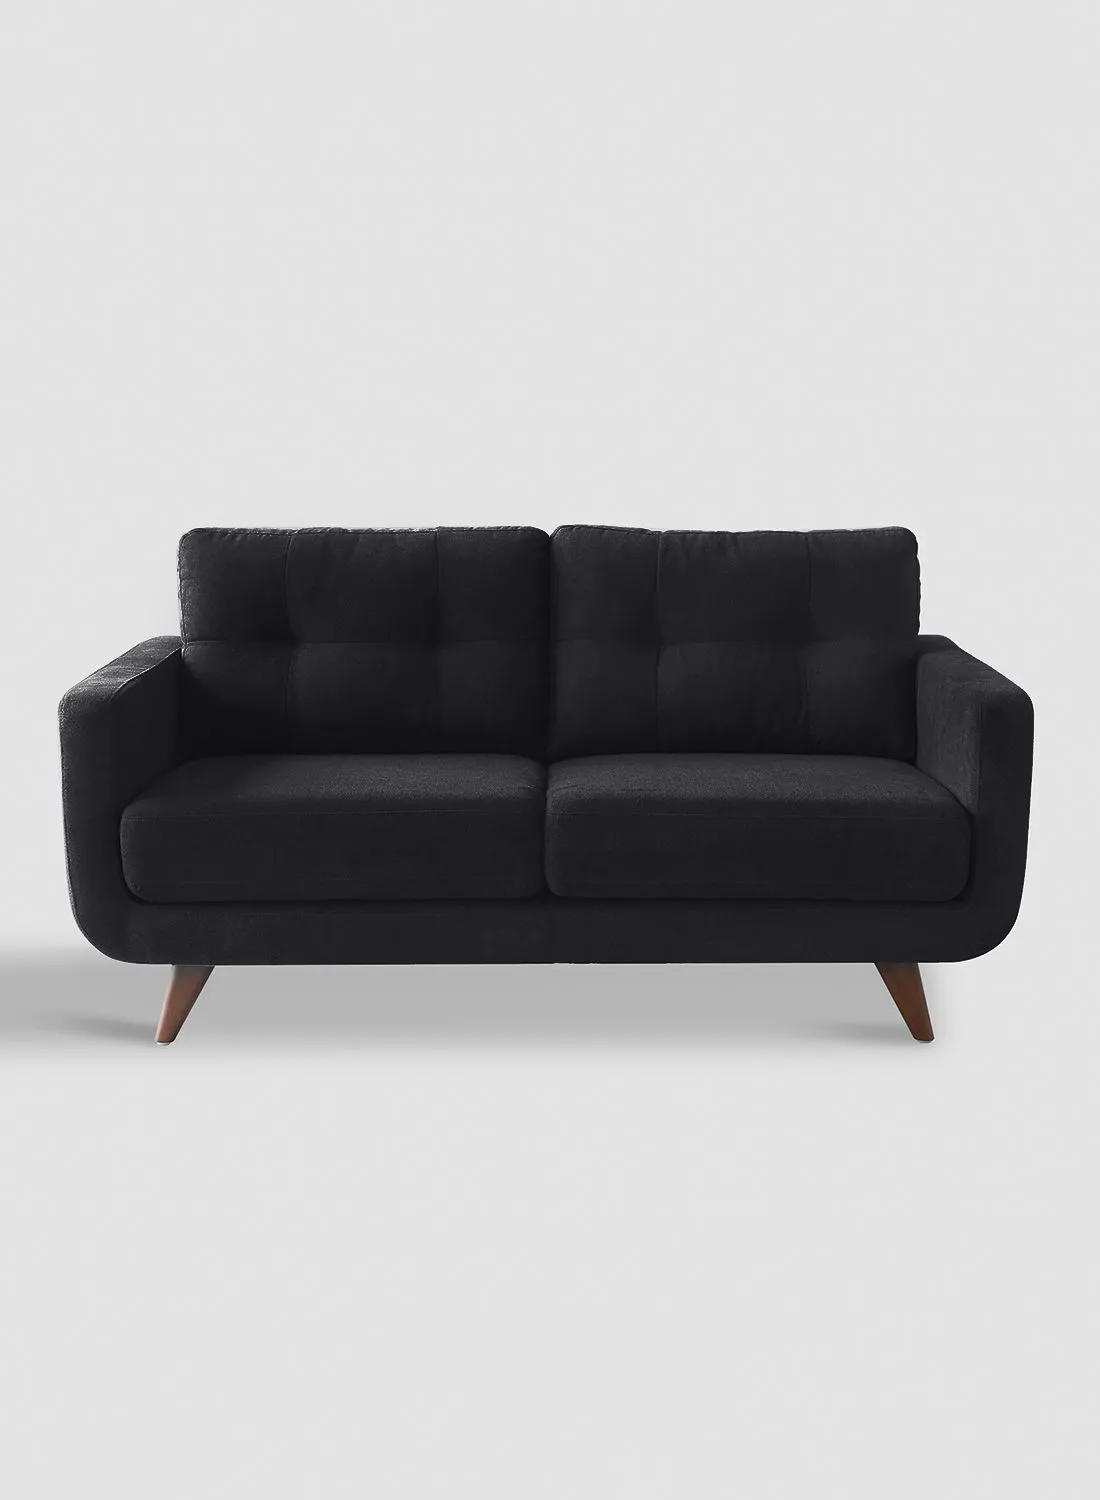 Switch Sofa - Upholstered Fabric Black Wood Couch - 1620 X 870 X 840 - 2 Seater Sofa Relaxing Sofa